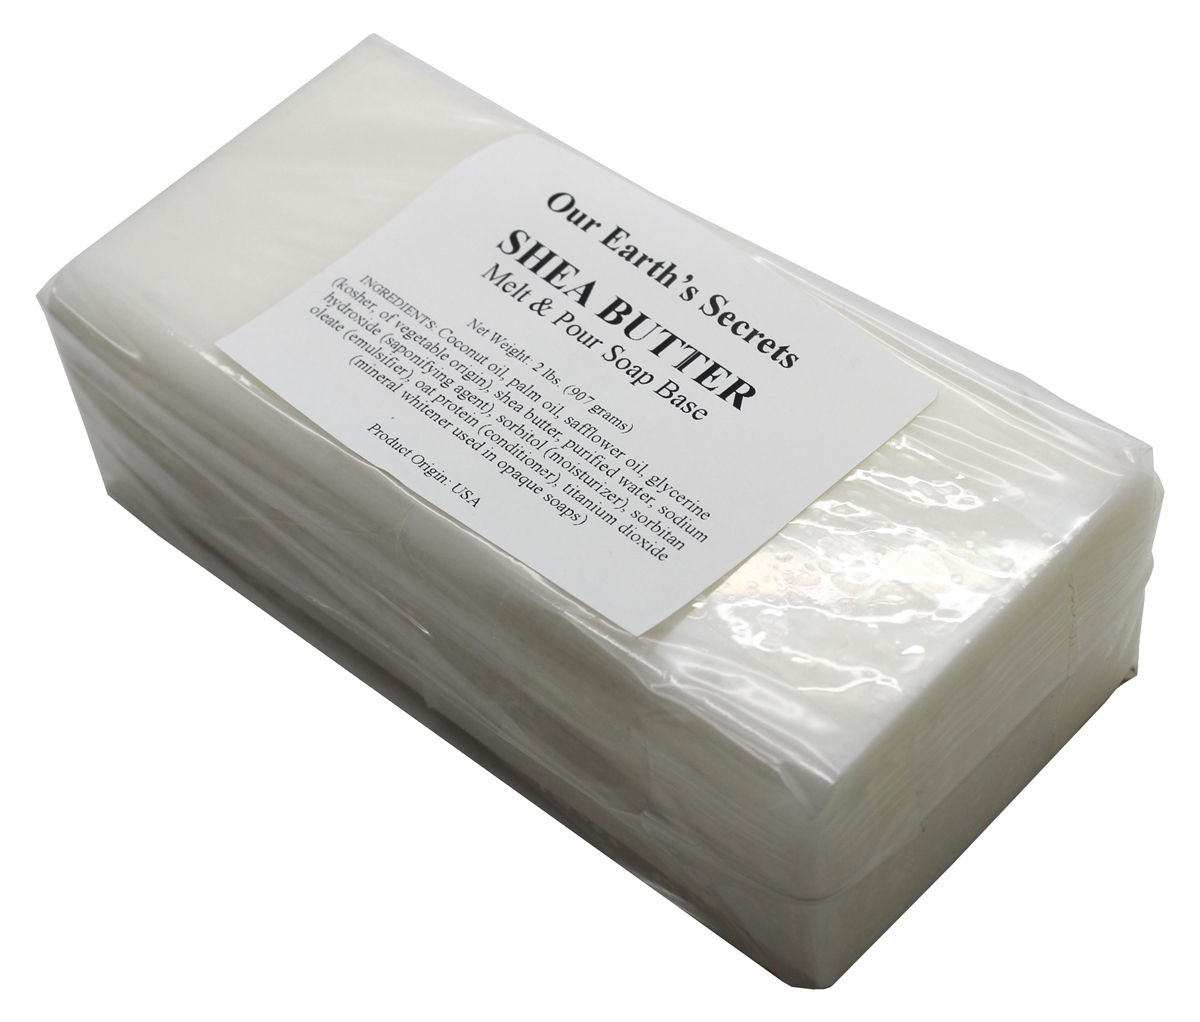  Our Earth's Secrets - 2 Lbs Melt and Pour Soap Base - Aloe Vera  : Beauty & Personal Care